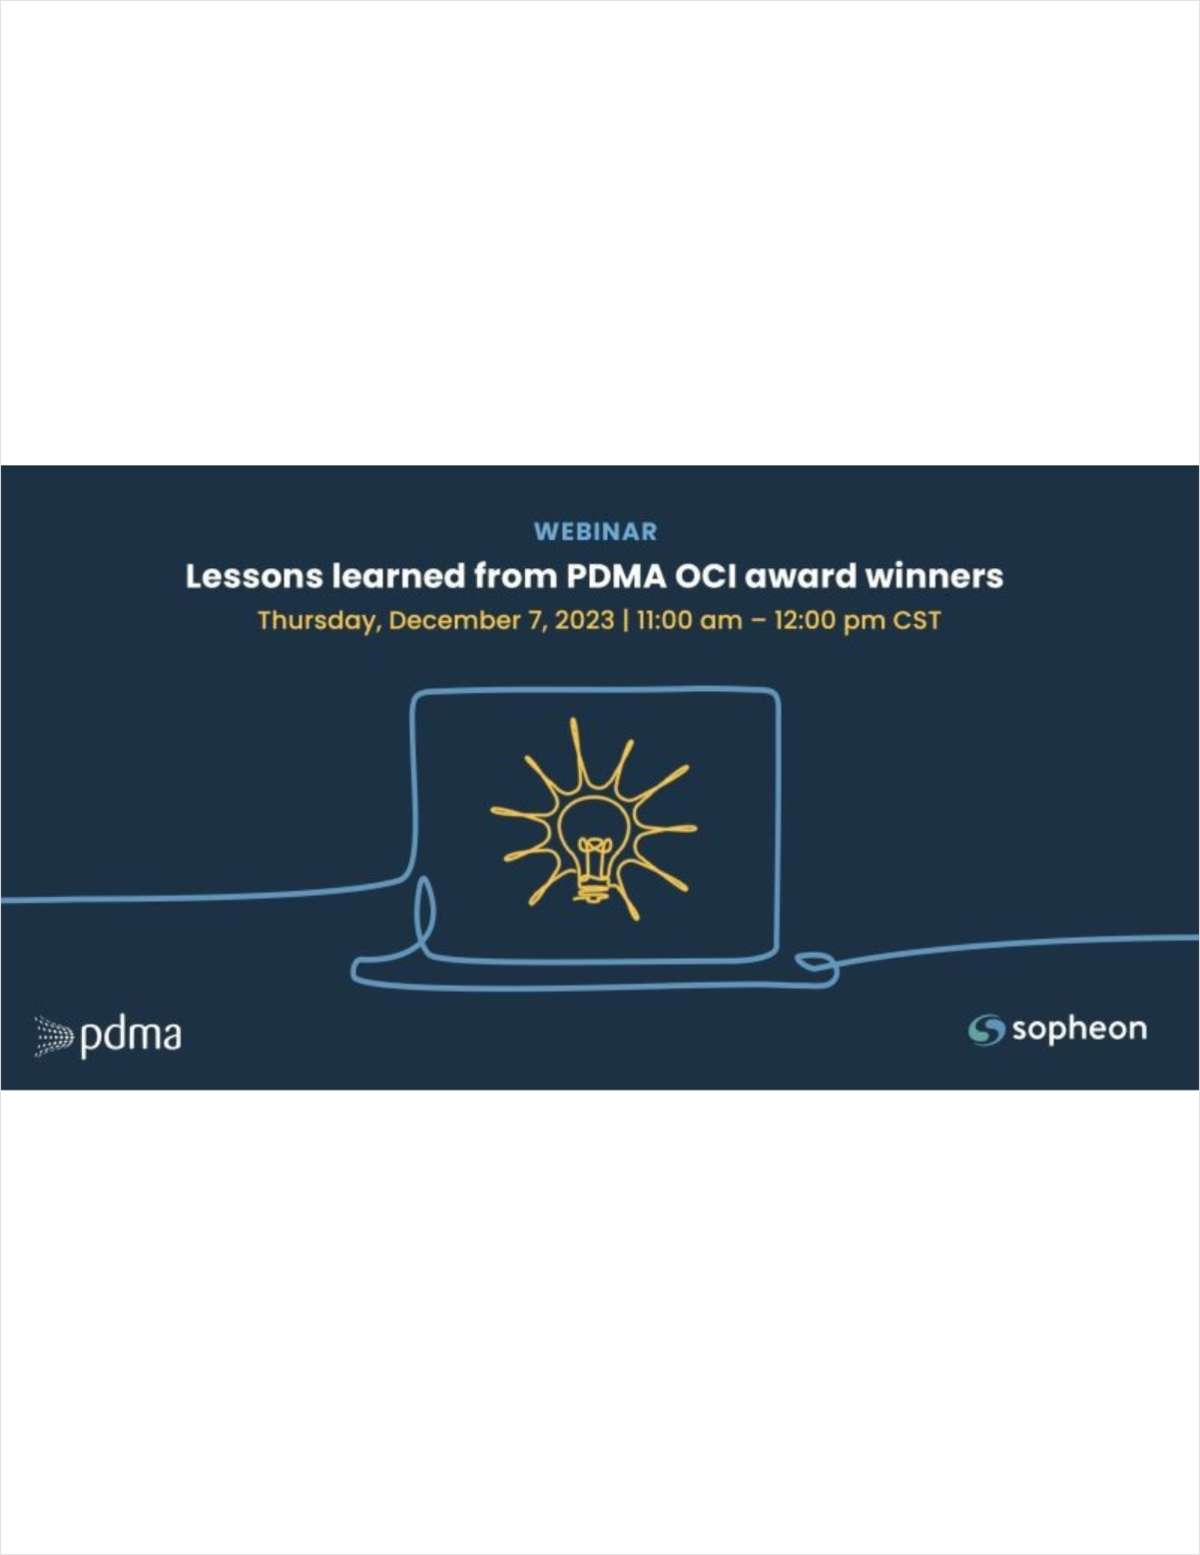 Lessons learned from PDMA Corporate Innovator Award Winners